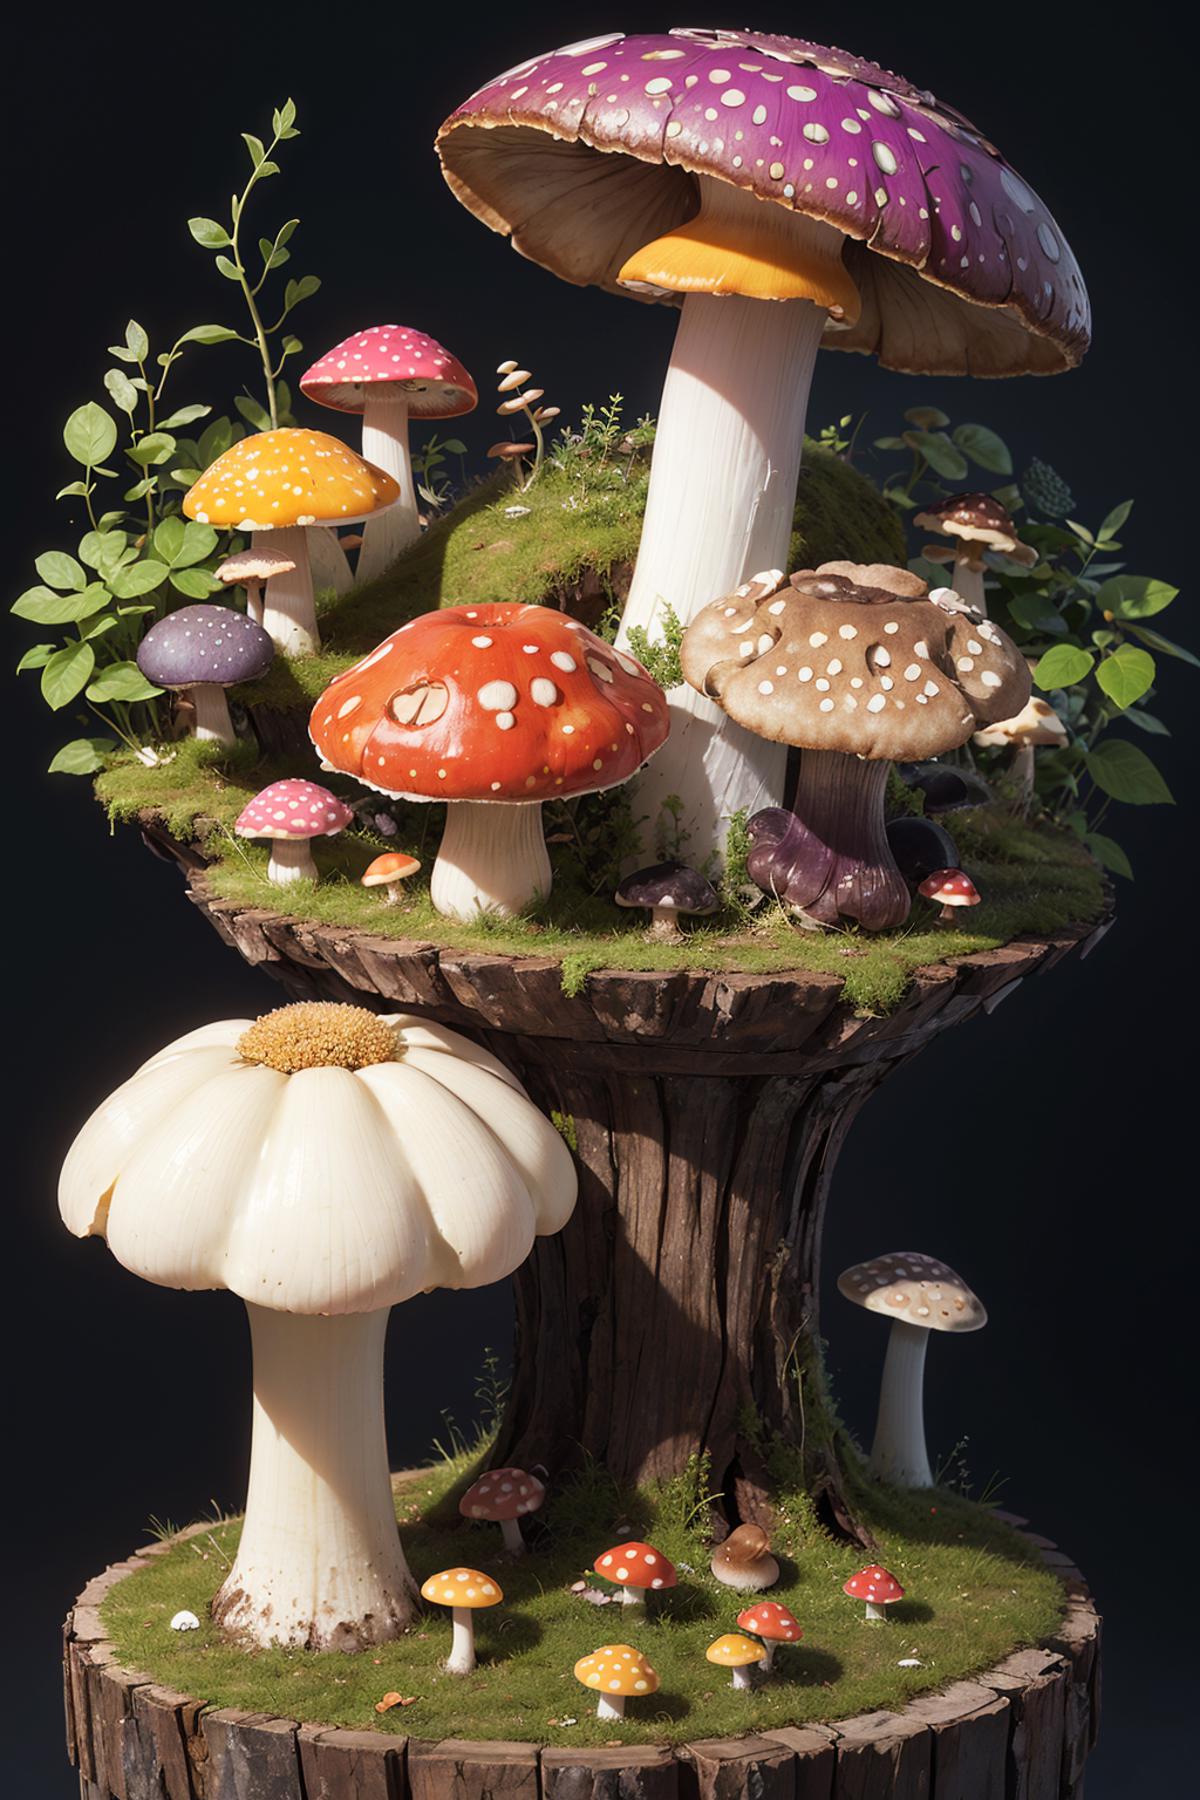 Billions of Plants/Shrooms - Standalone image by Tokugawa